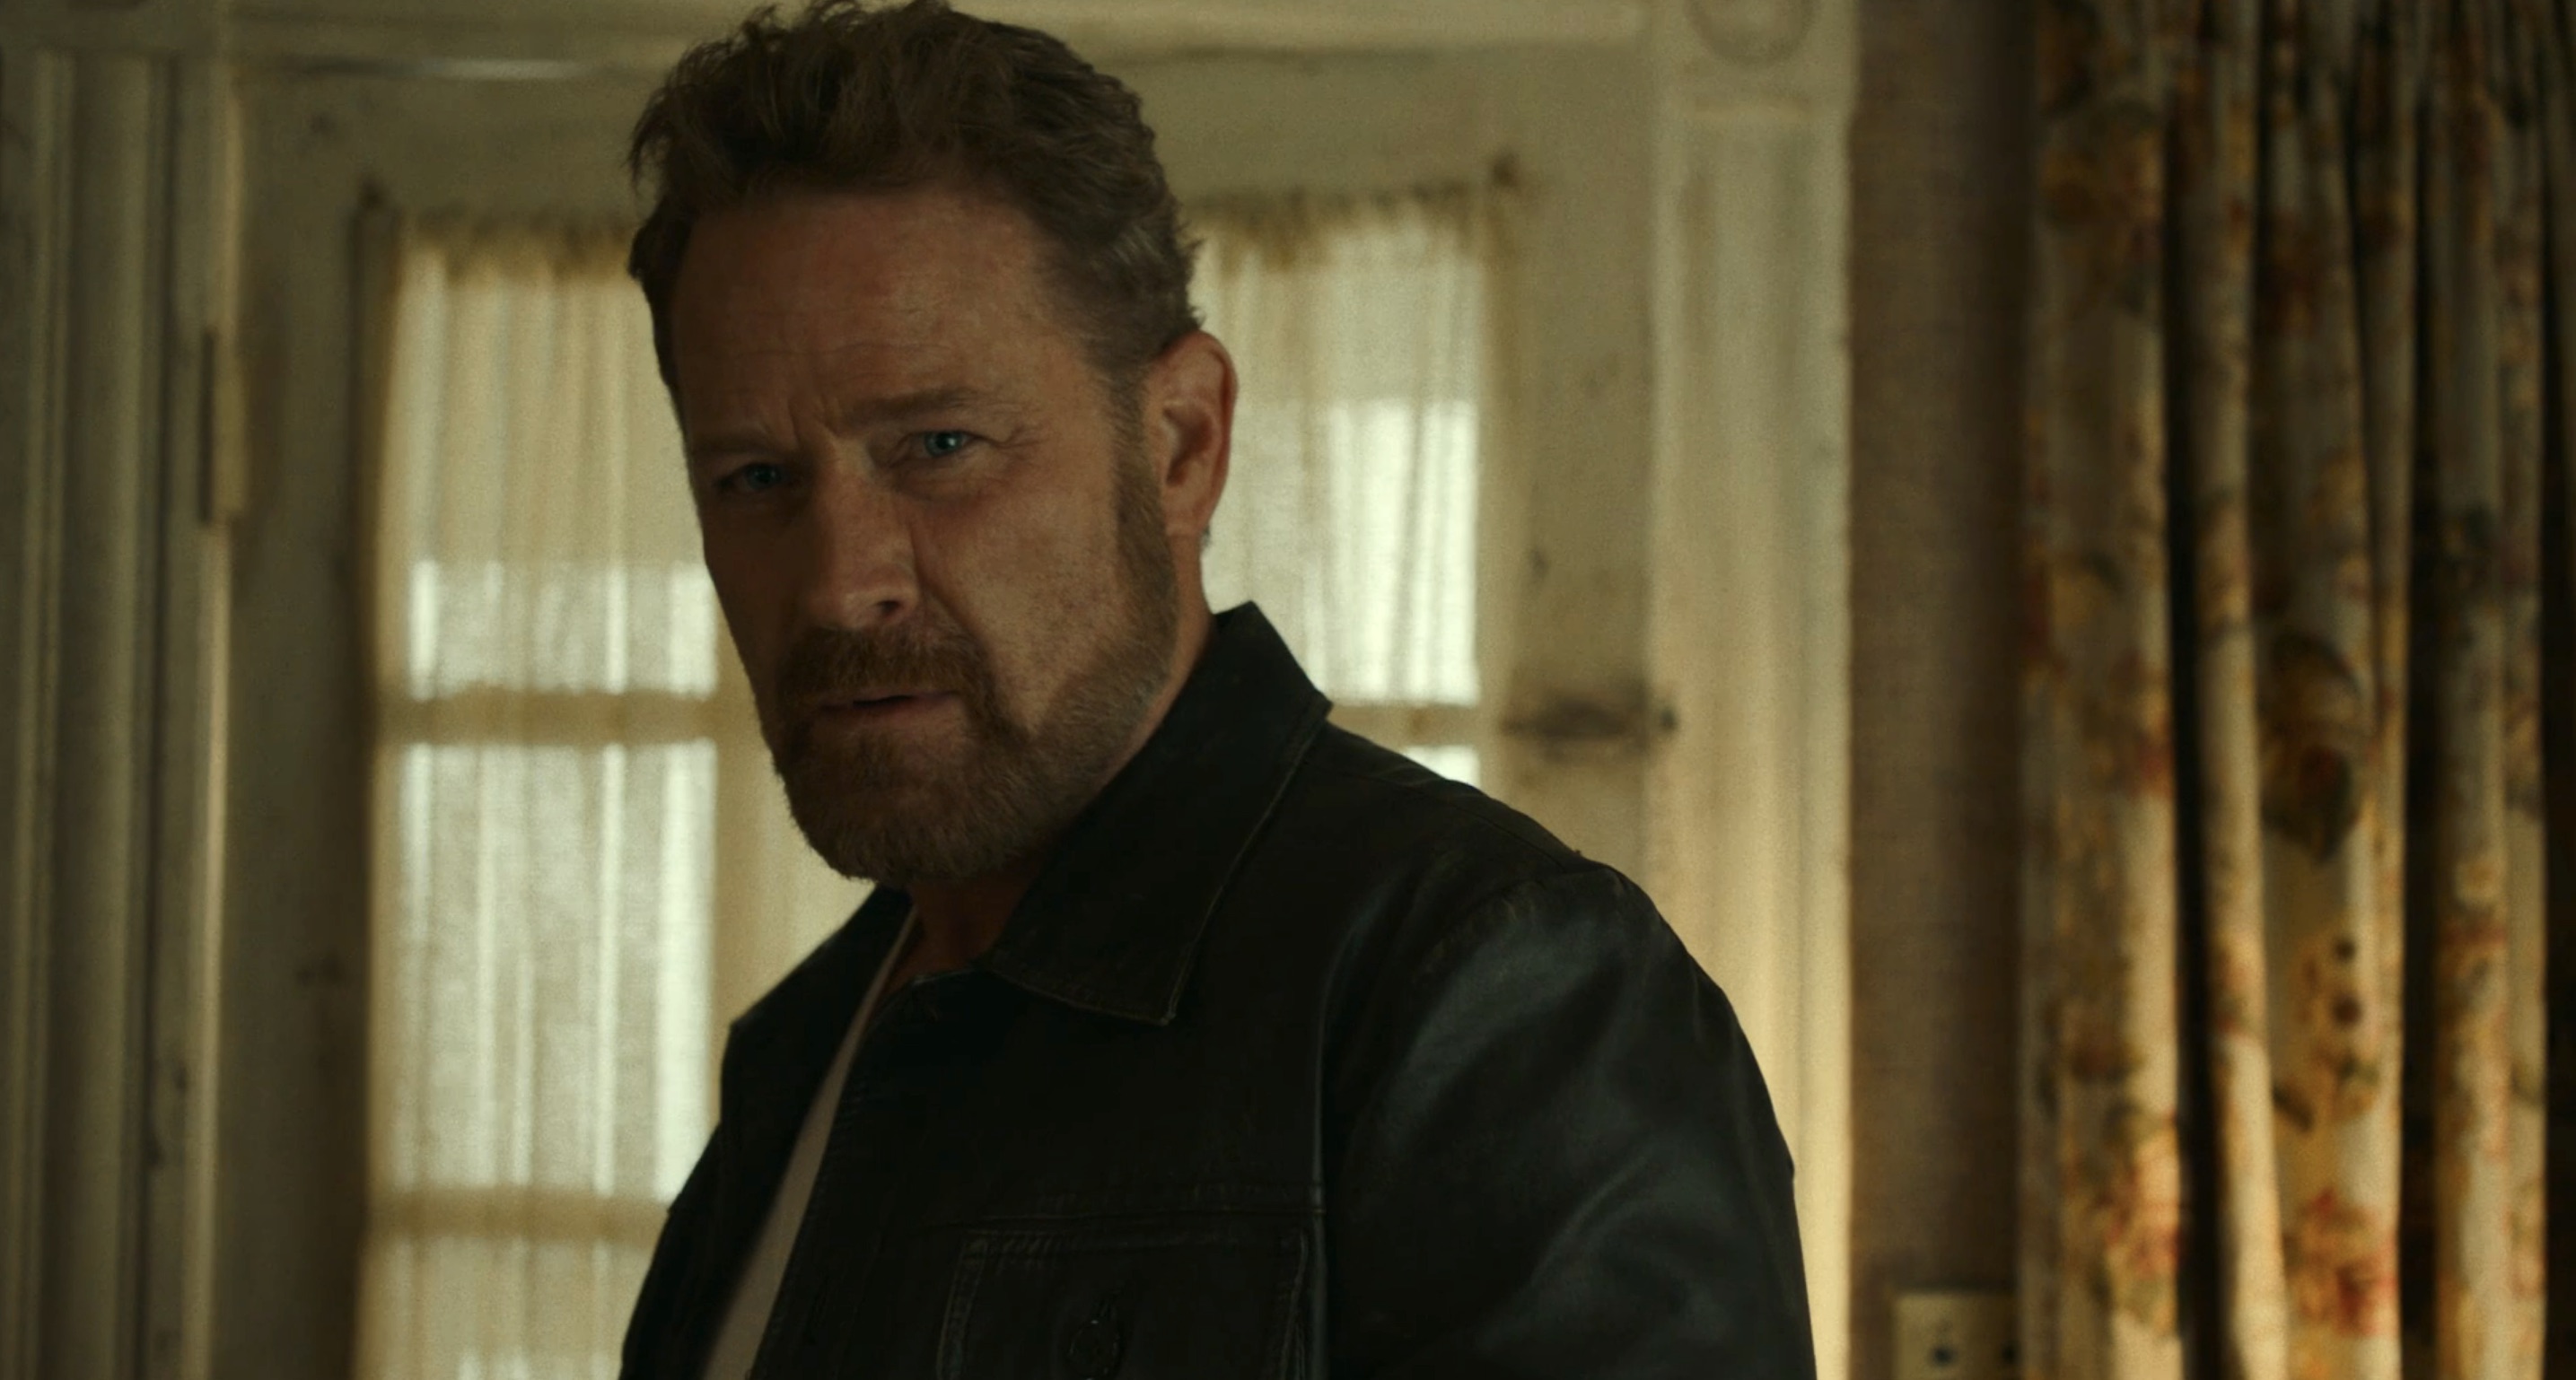 The Tender Bar Cast - Max Martini as The Voice